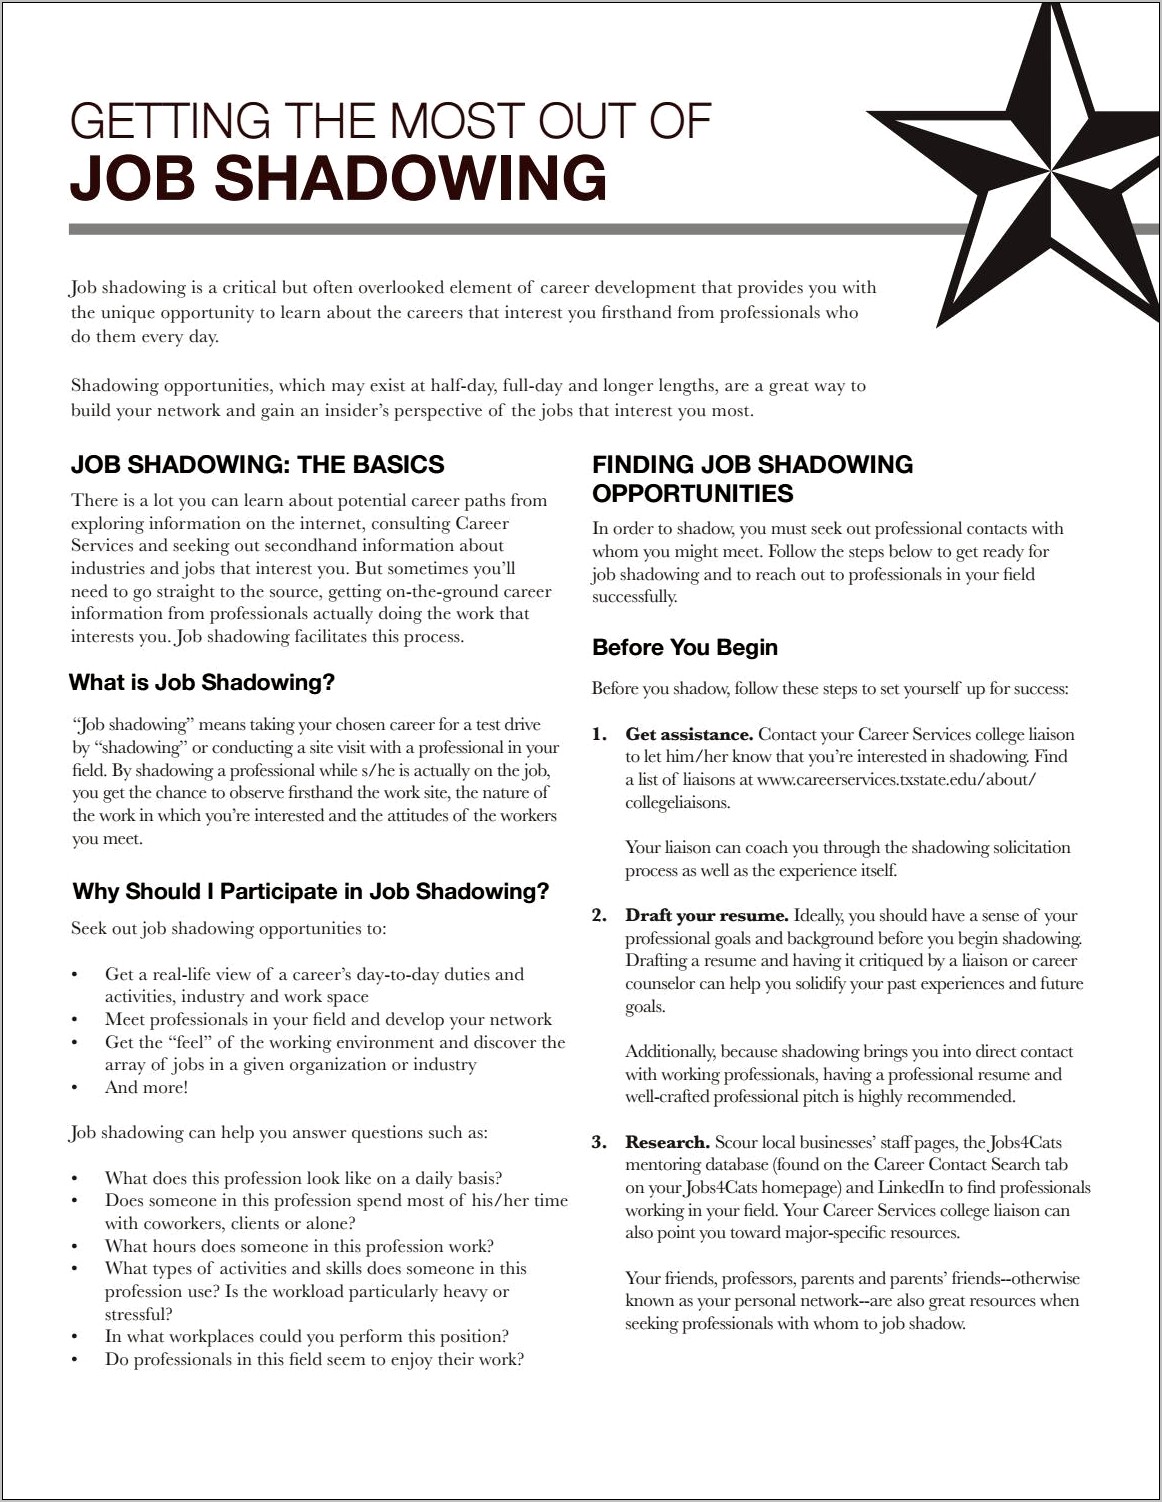 Can You Put Job Shadowing On Your Resume